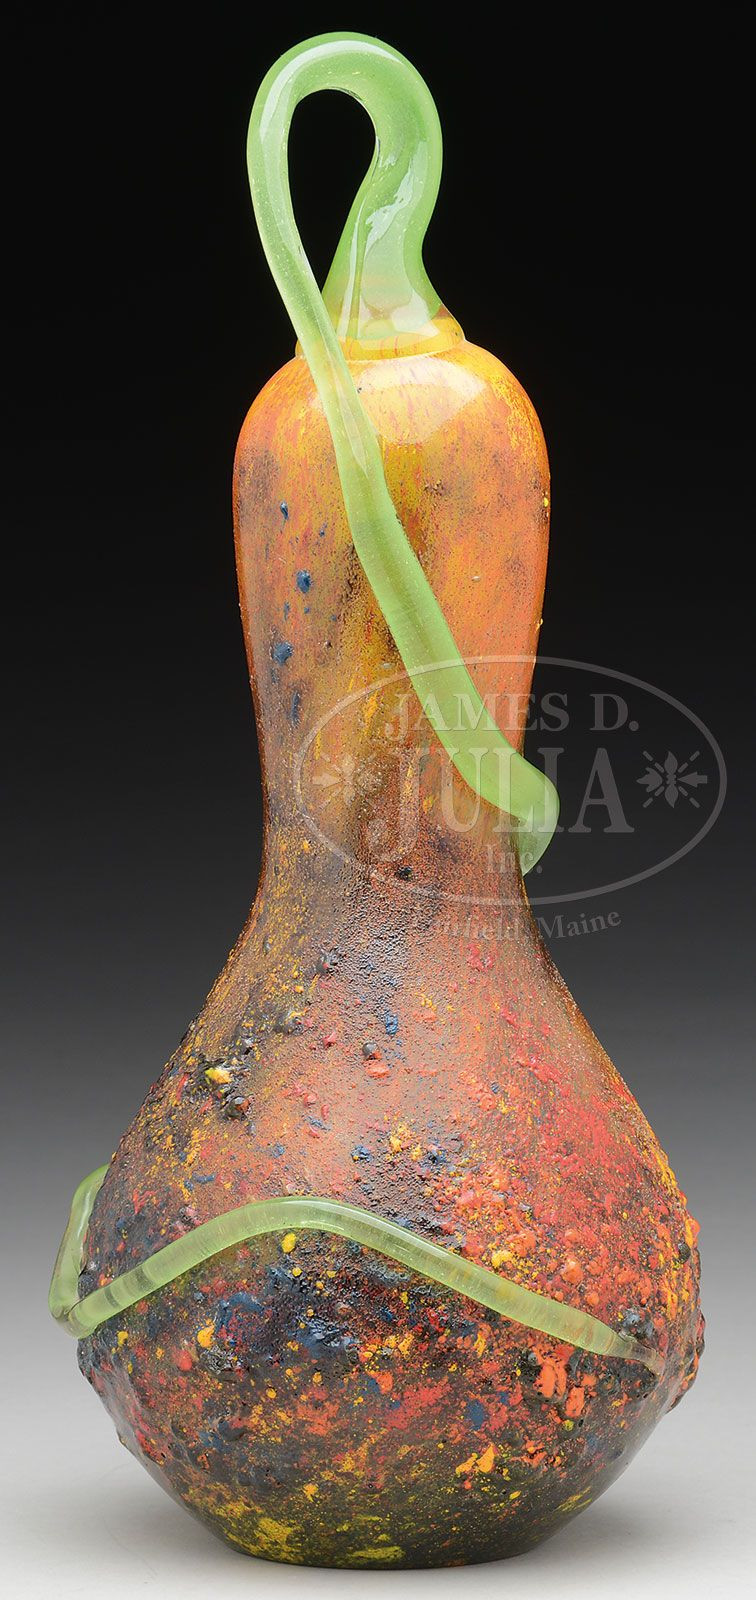 15 Unique Red Crystal Vase 2024 free download red crystal vase of daum vitrified gourd vase daum gourd vase has vitrified glass body throughout daum vitrified gourd vase daum gourd vase has vitrified glass body with splashes of red